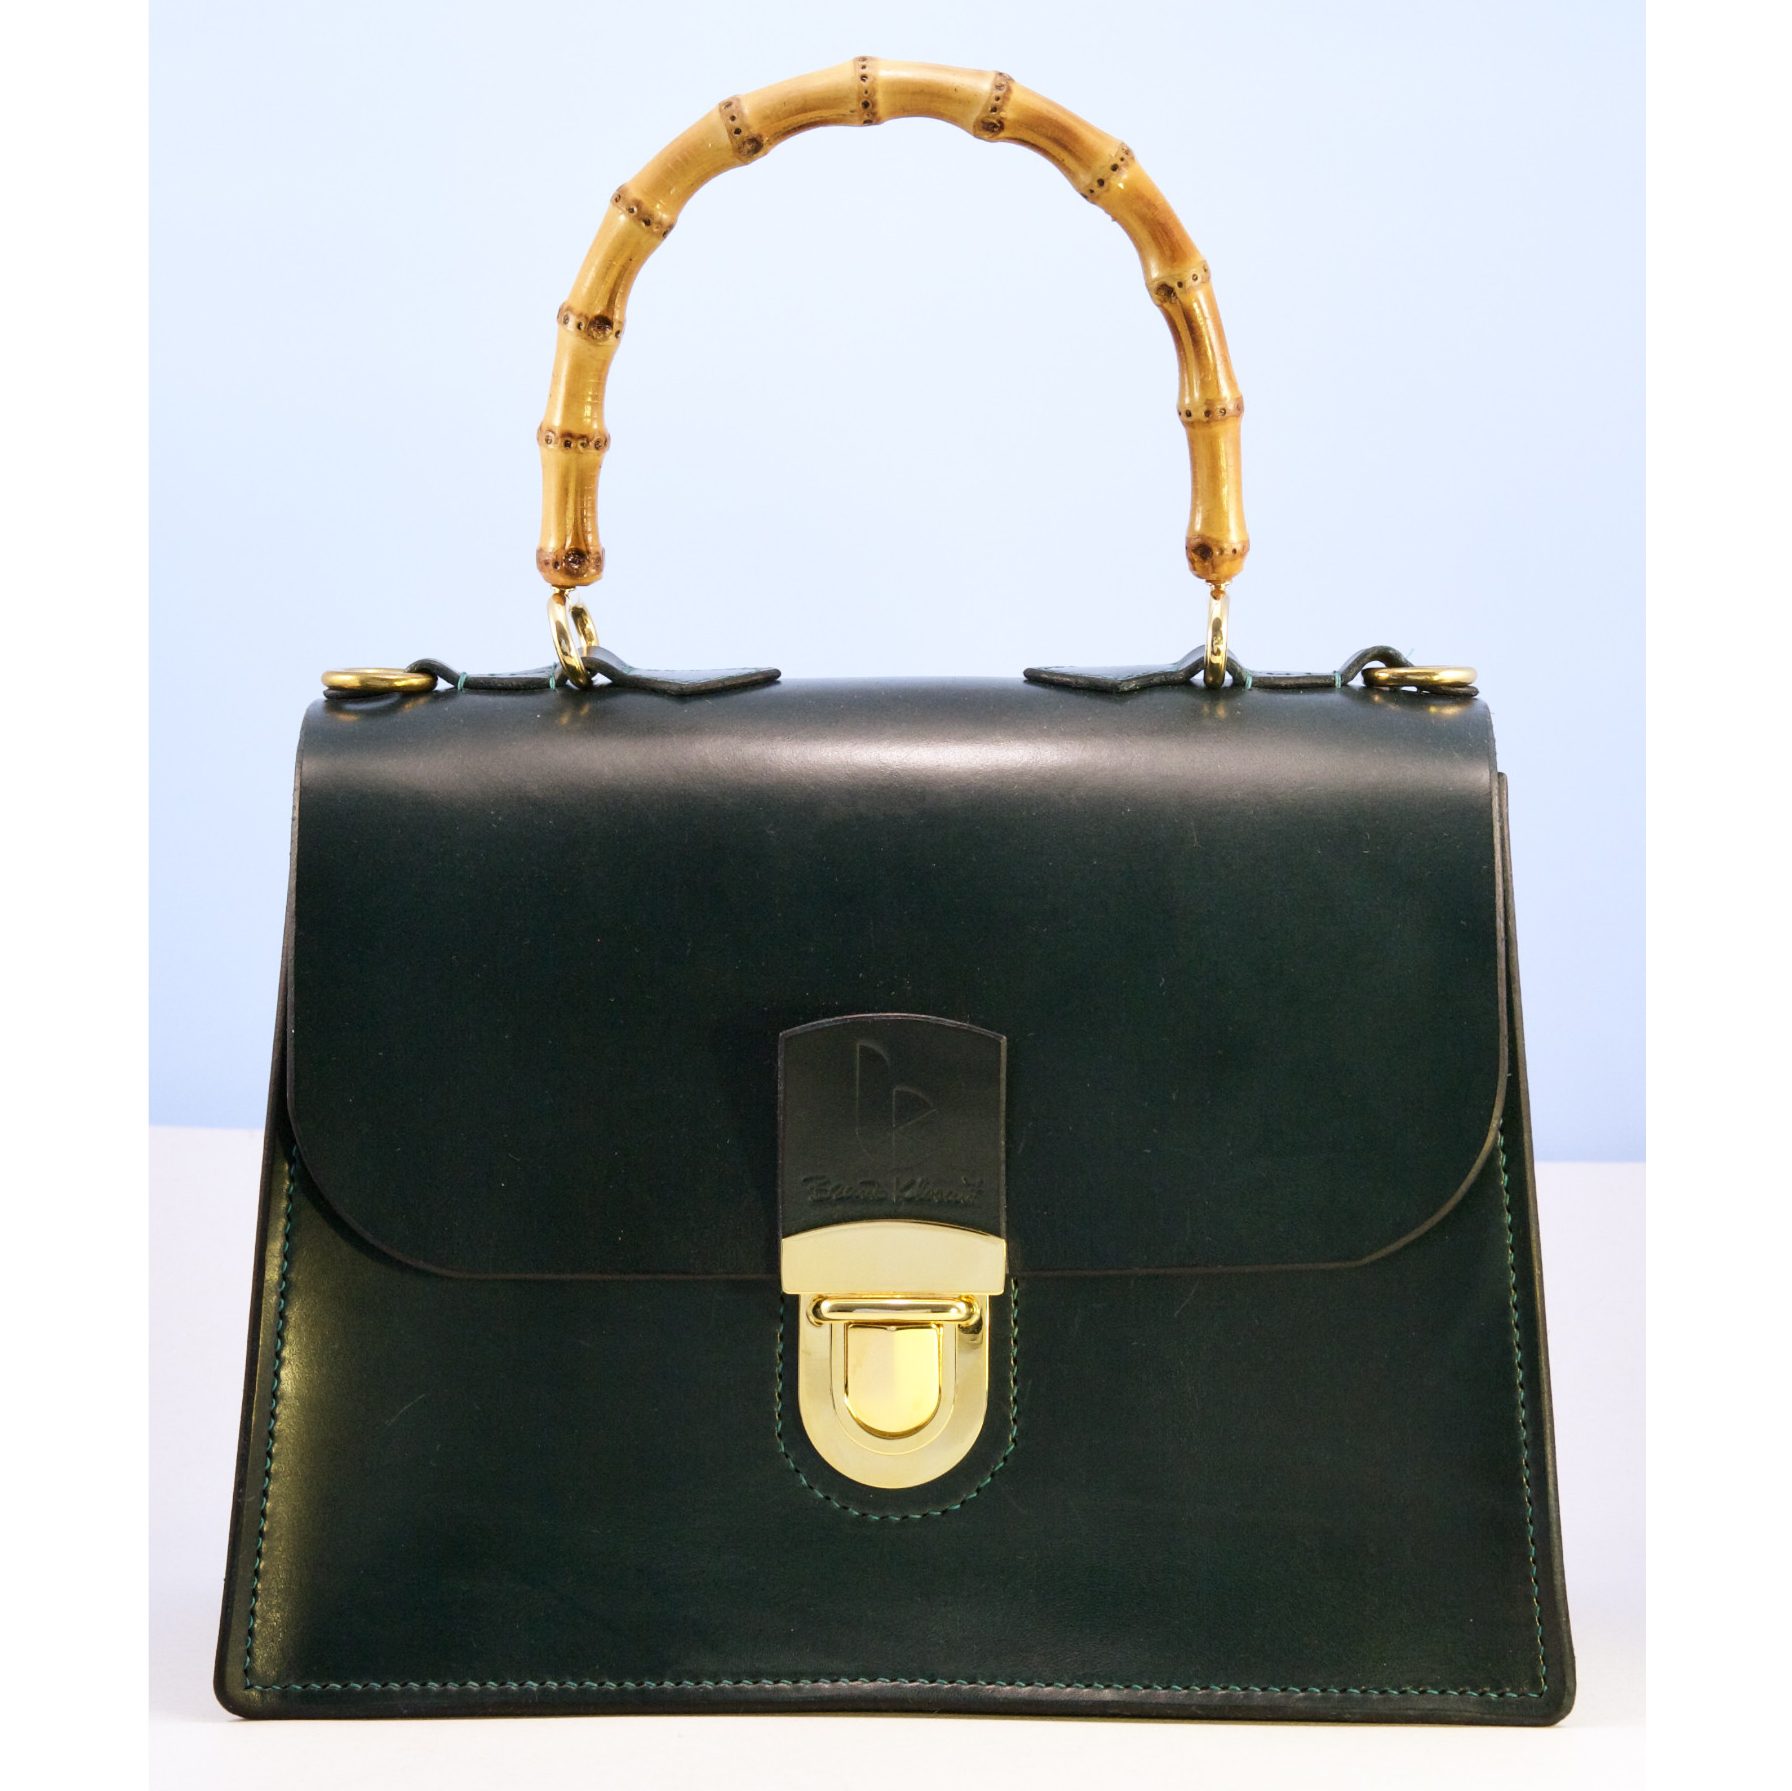 leather handbag with bamboo handle front view